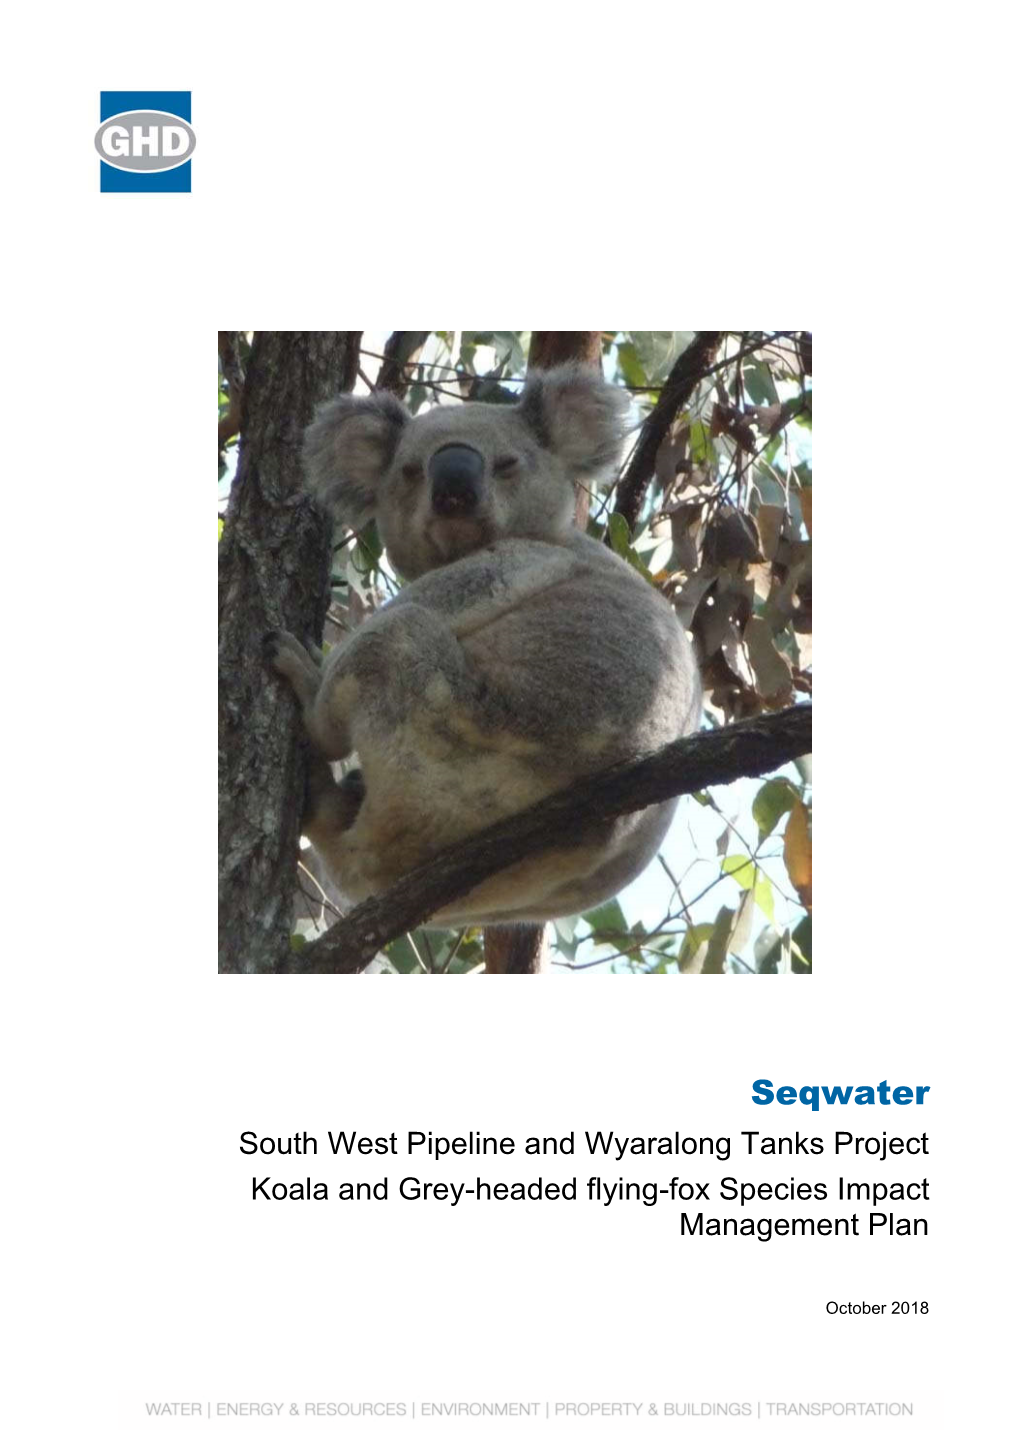 South West Pipeline and Wyaralong Tanks Project Koala and Grey-Headed Flying-Fox Species Impact Management Plan